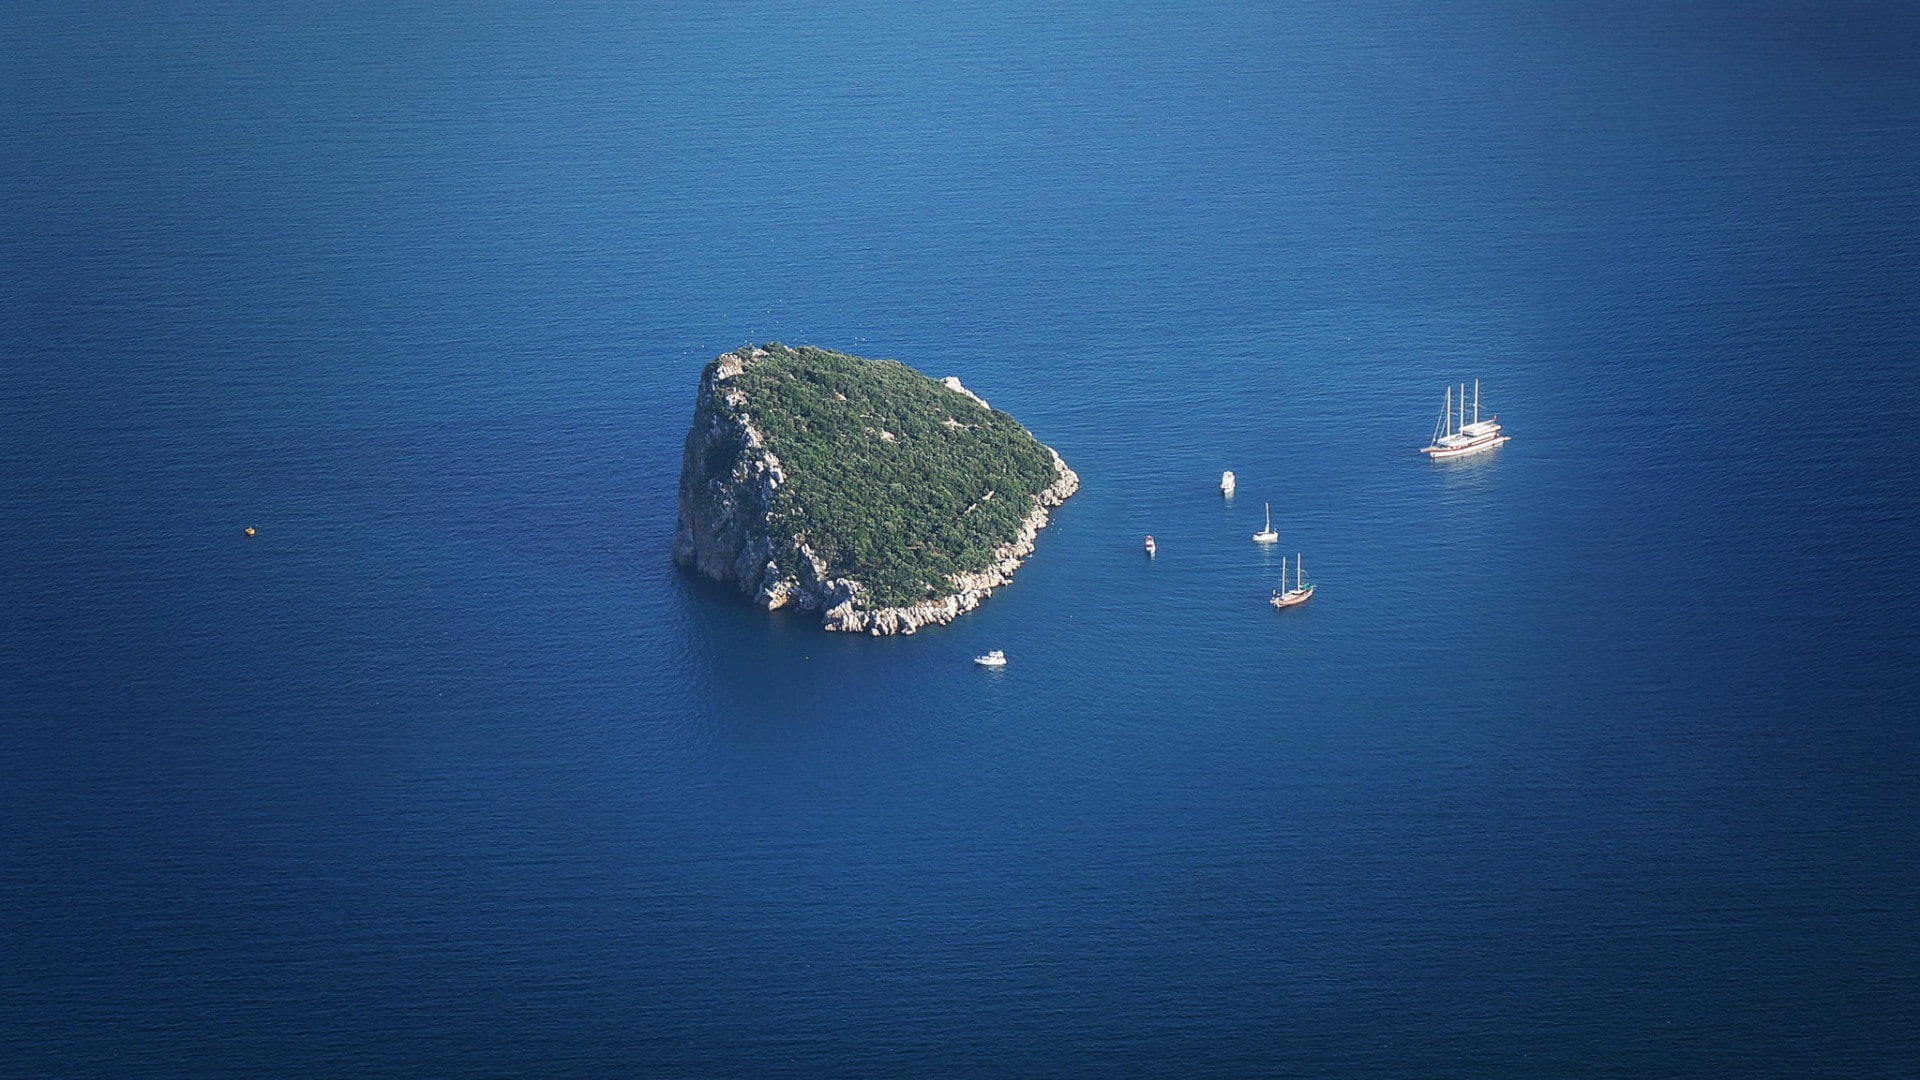 rock  blue  water  trees  aerial view  yachts  island  sailing ship  sea  boat  minimalism  birds eye view  landscape  nature